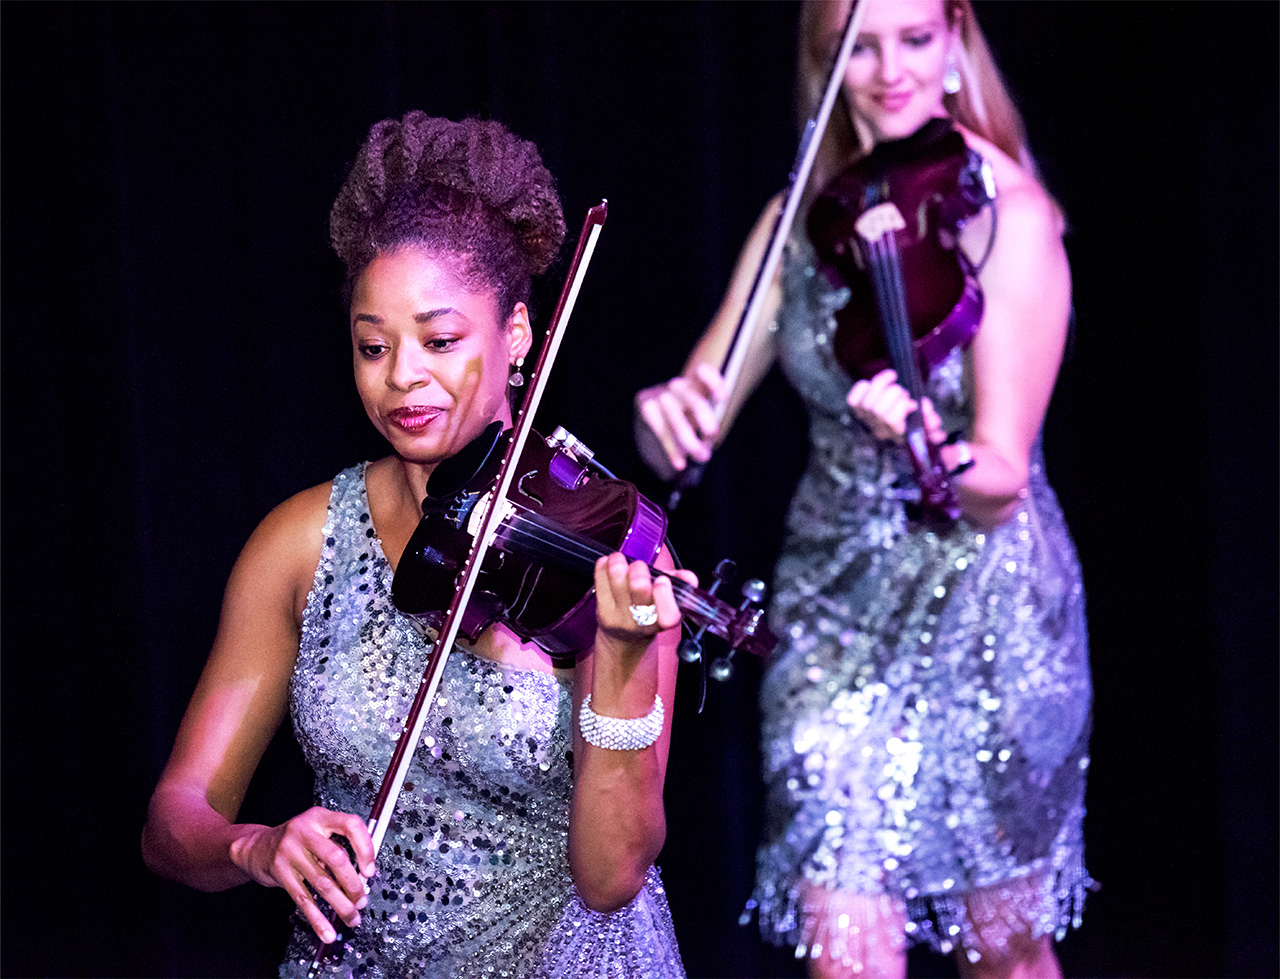 Two violinists doing an opening performance at a Gala dinner